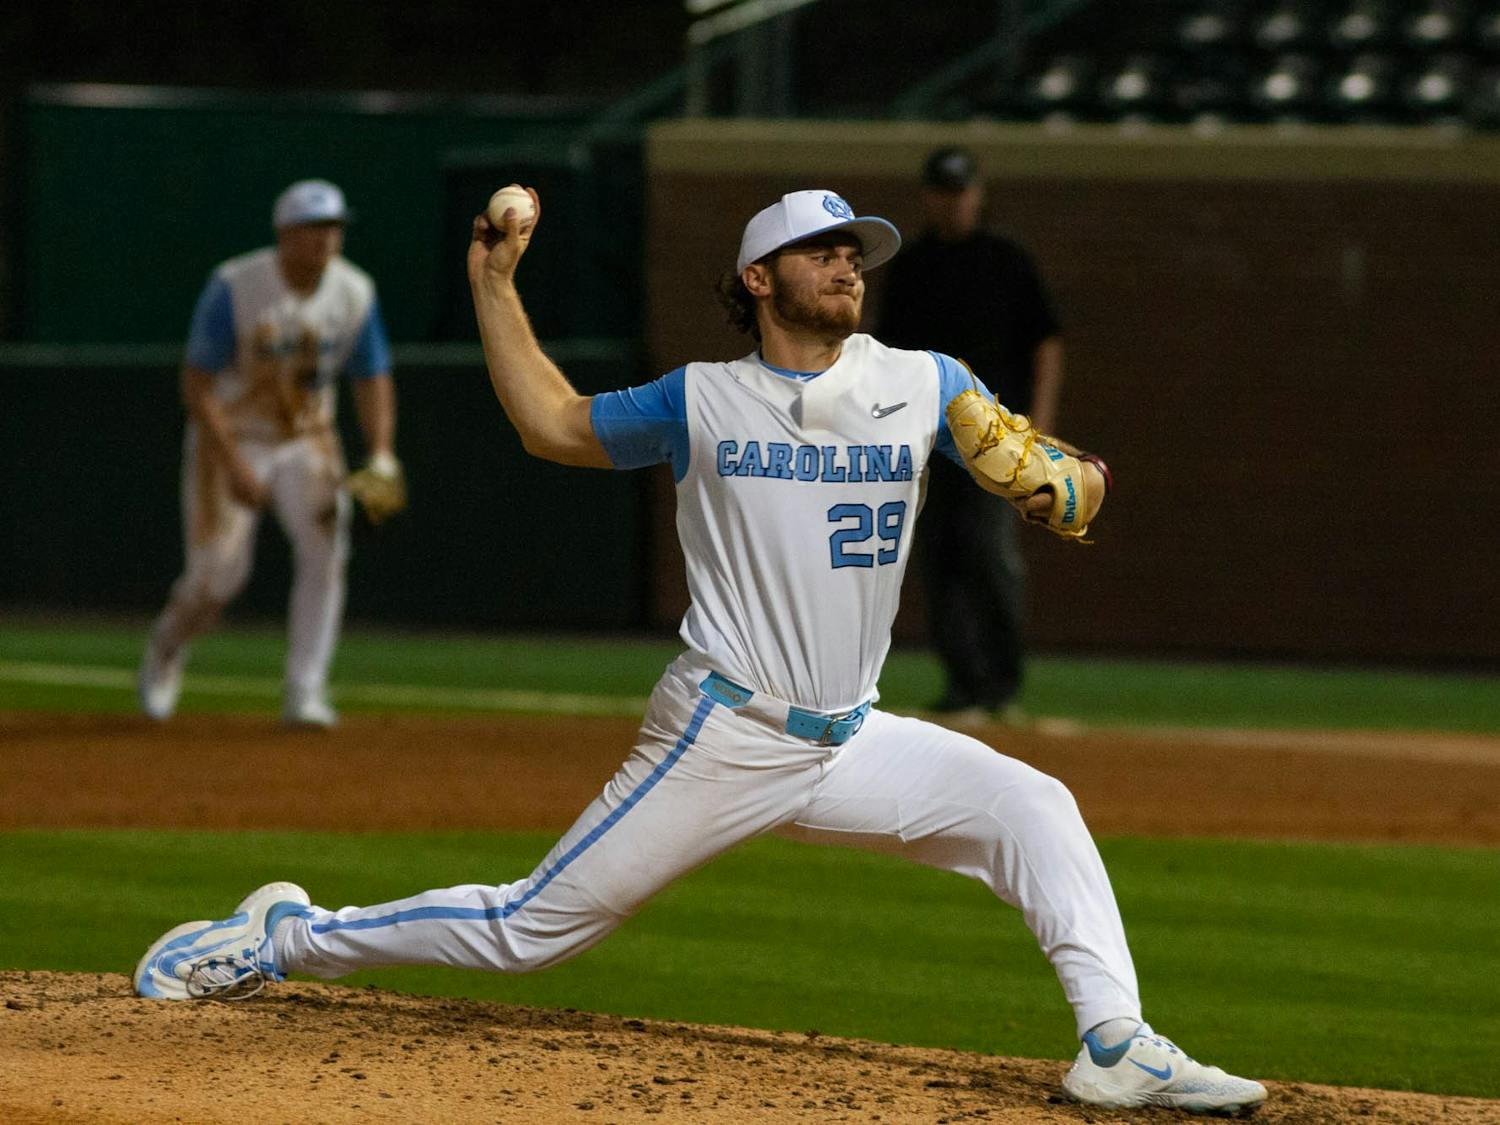 UNC graduate Kevin Eaise pitches for the Tar Heels in their 10-0 victory over Longwood on Wednesday, Feb, 22, at the Boshamer Stadium.